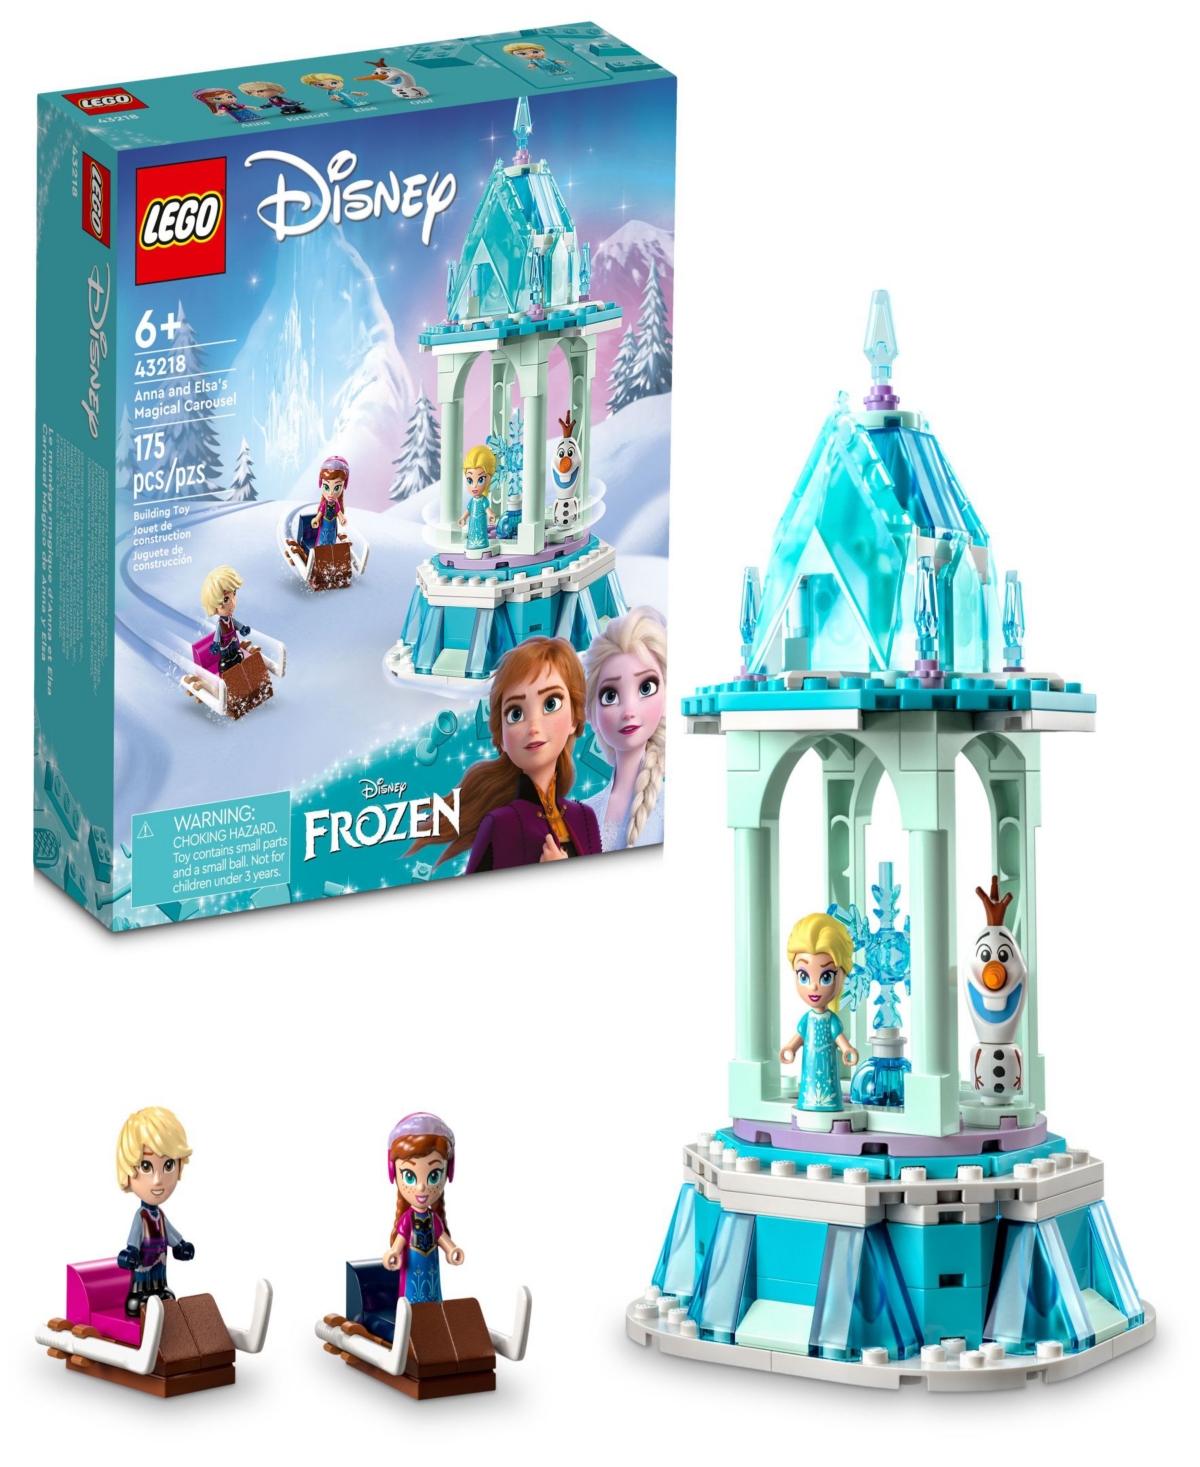 Lego Kids' Disney 43218 Princess Anna And Elsa's Magical Carousel Toy Building Set In Multicolor